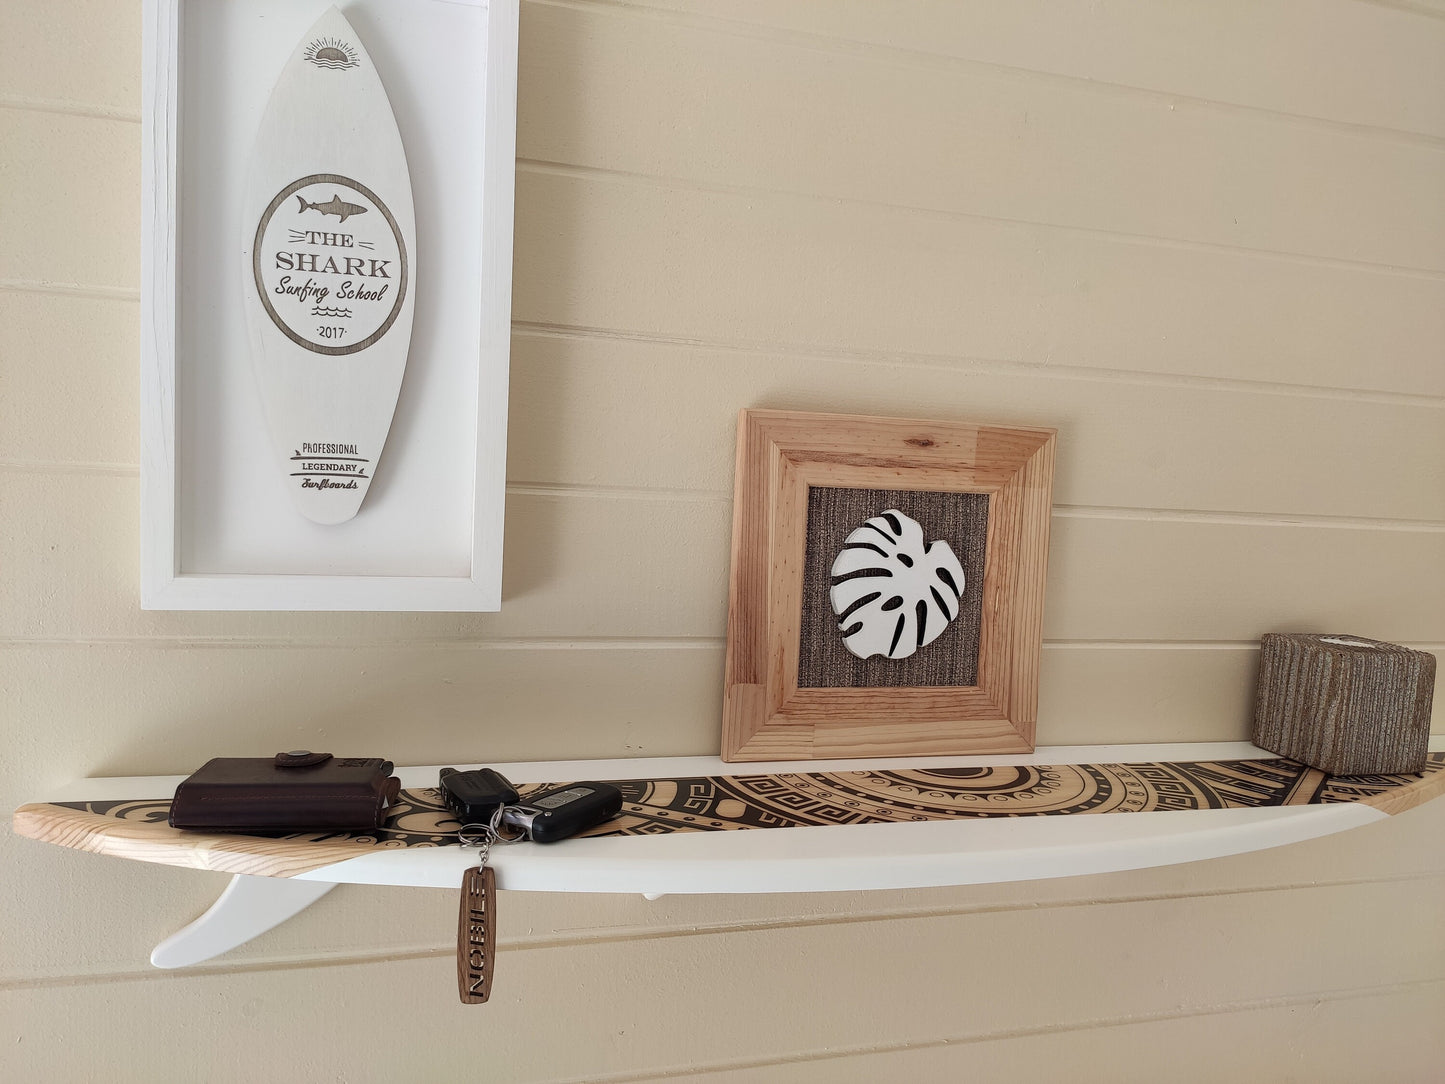 Surfing Board Inspired Floating Shelf: White with Black Graphic Print Wooden Wall Shelving for Stylish Wall Decoration